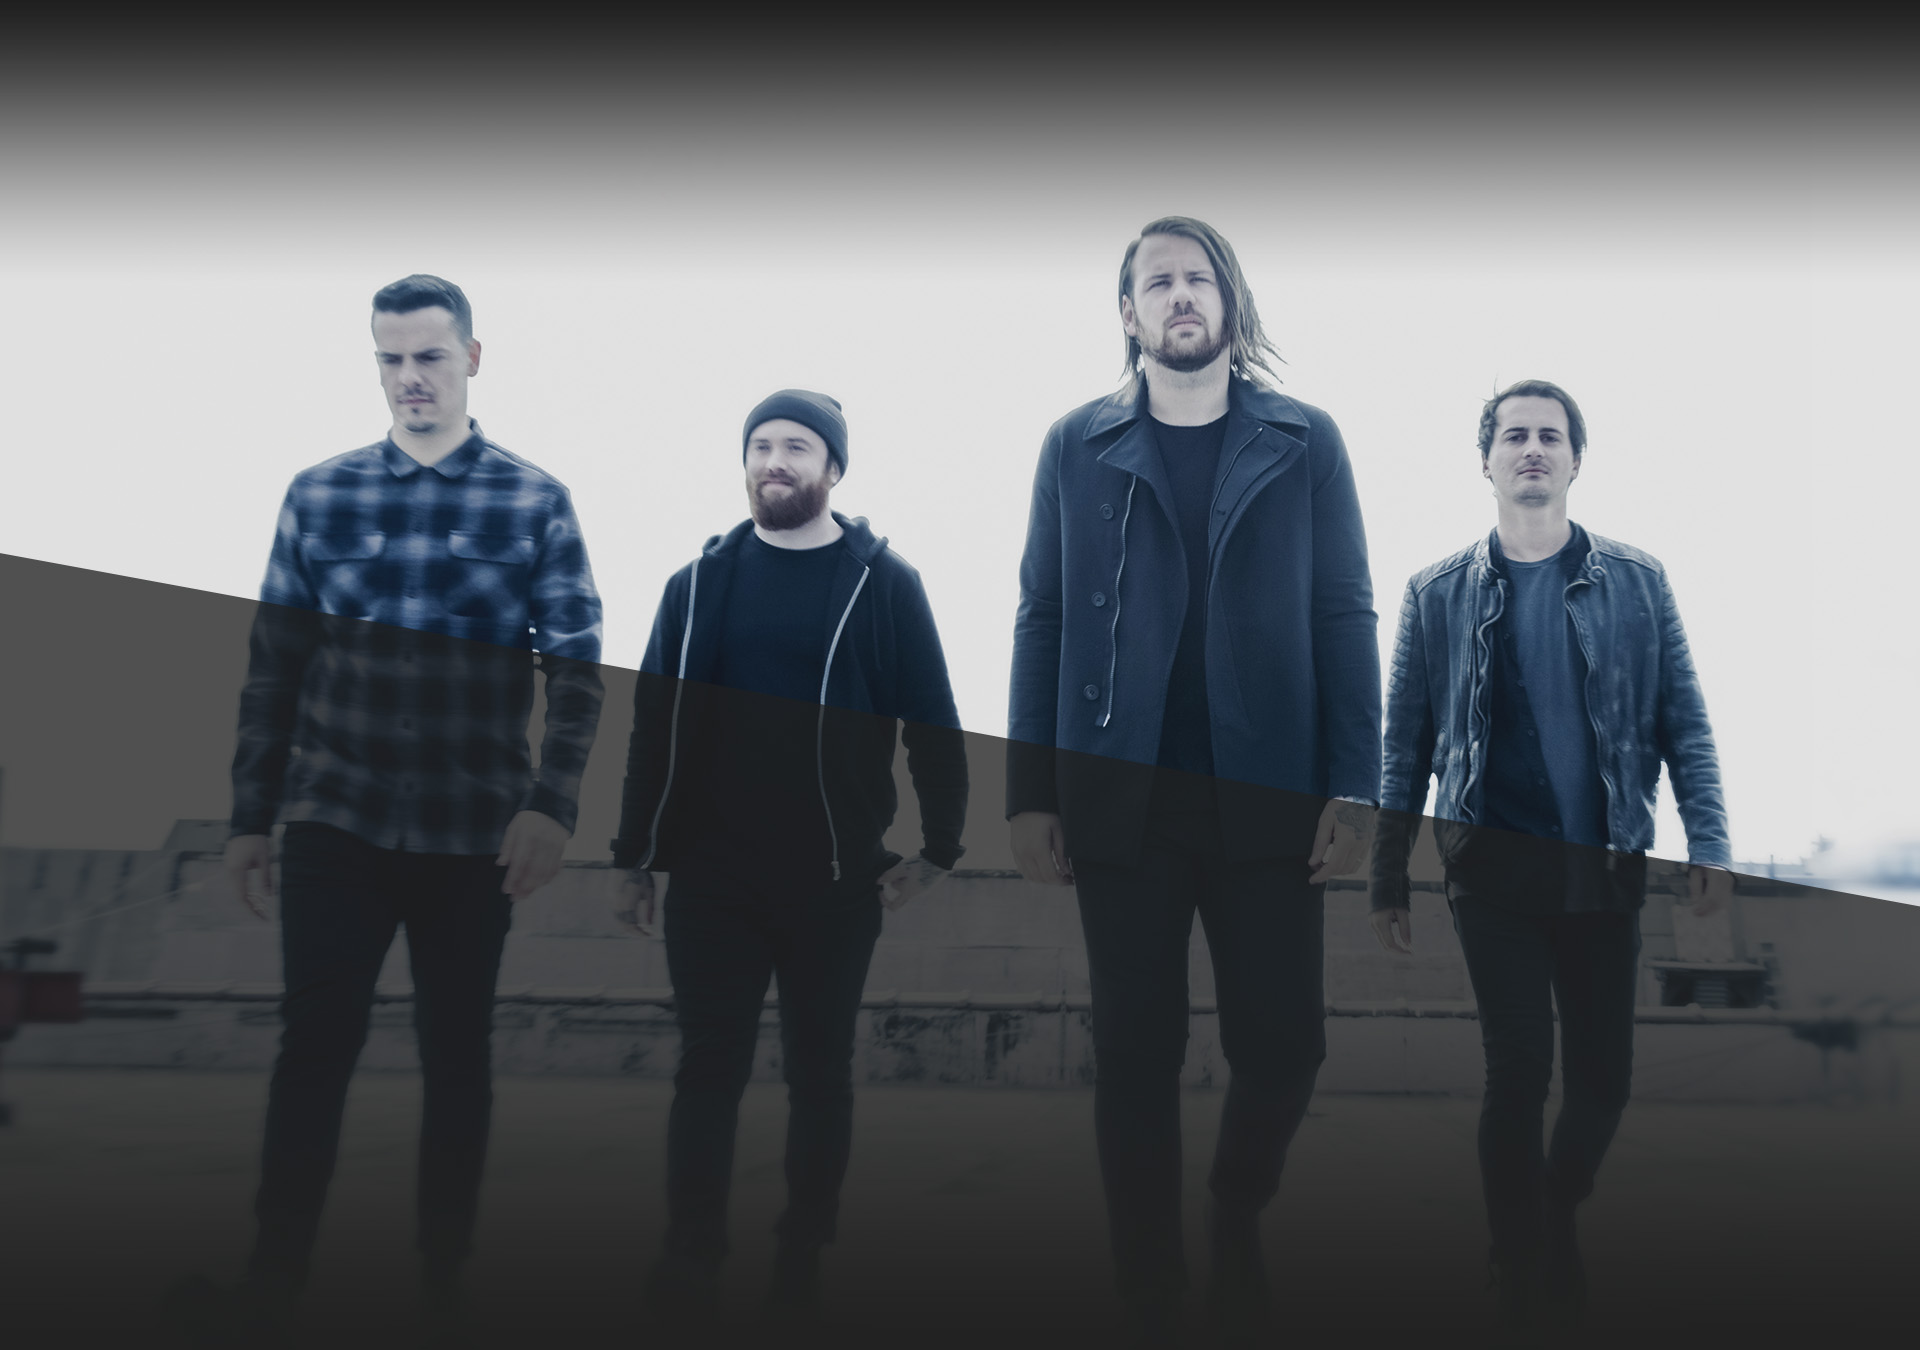 HD desktop wallpaper of the band Beartooth with members posing for a group photo, ideal for background use.